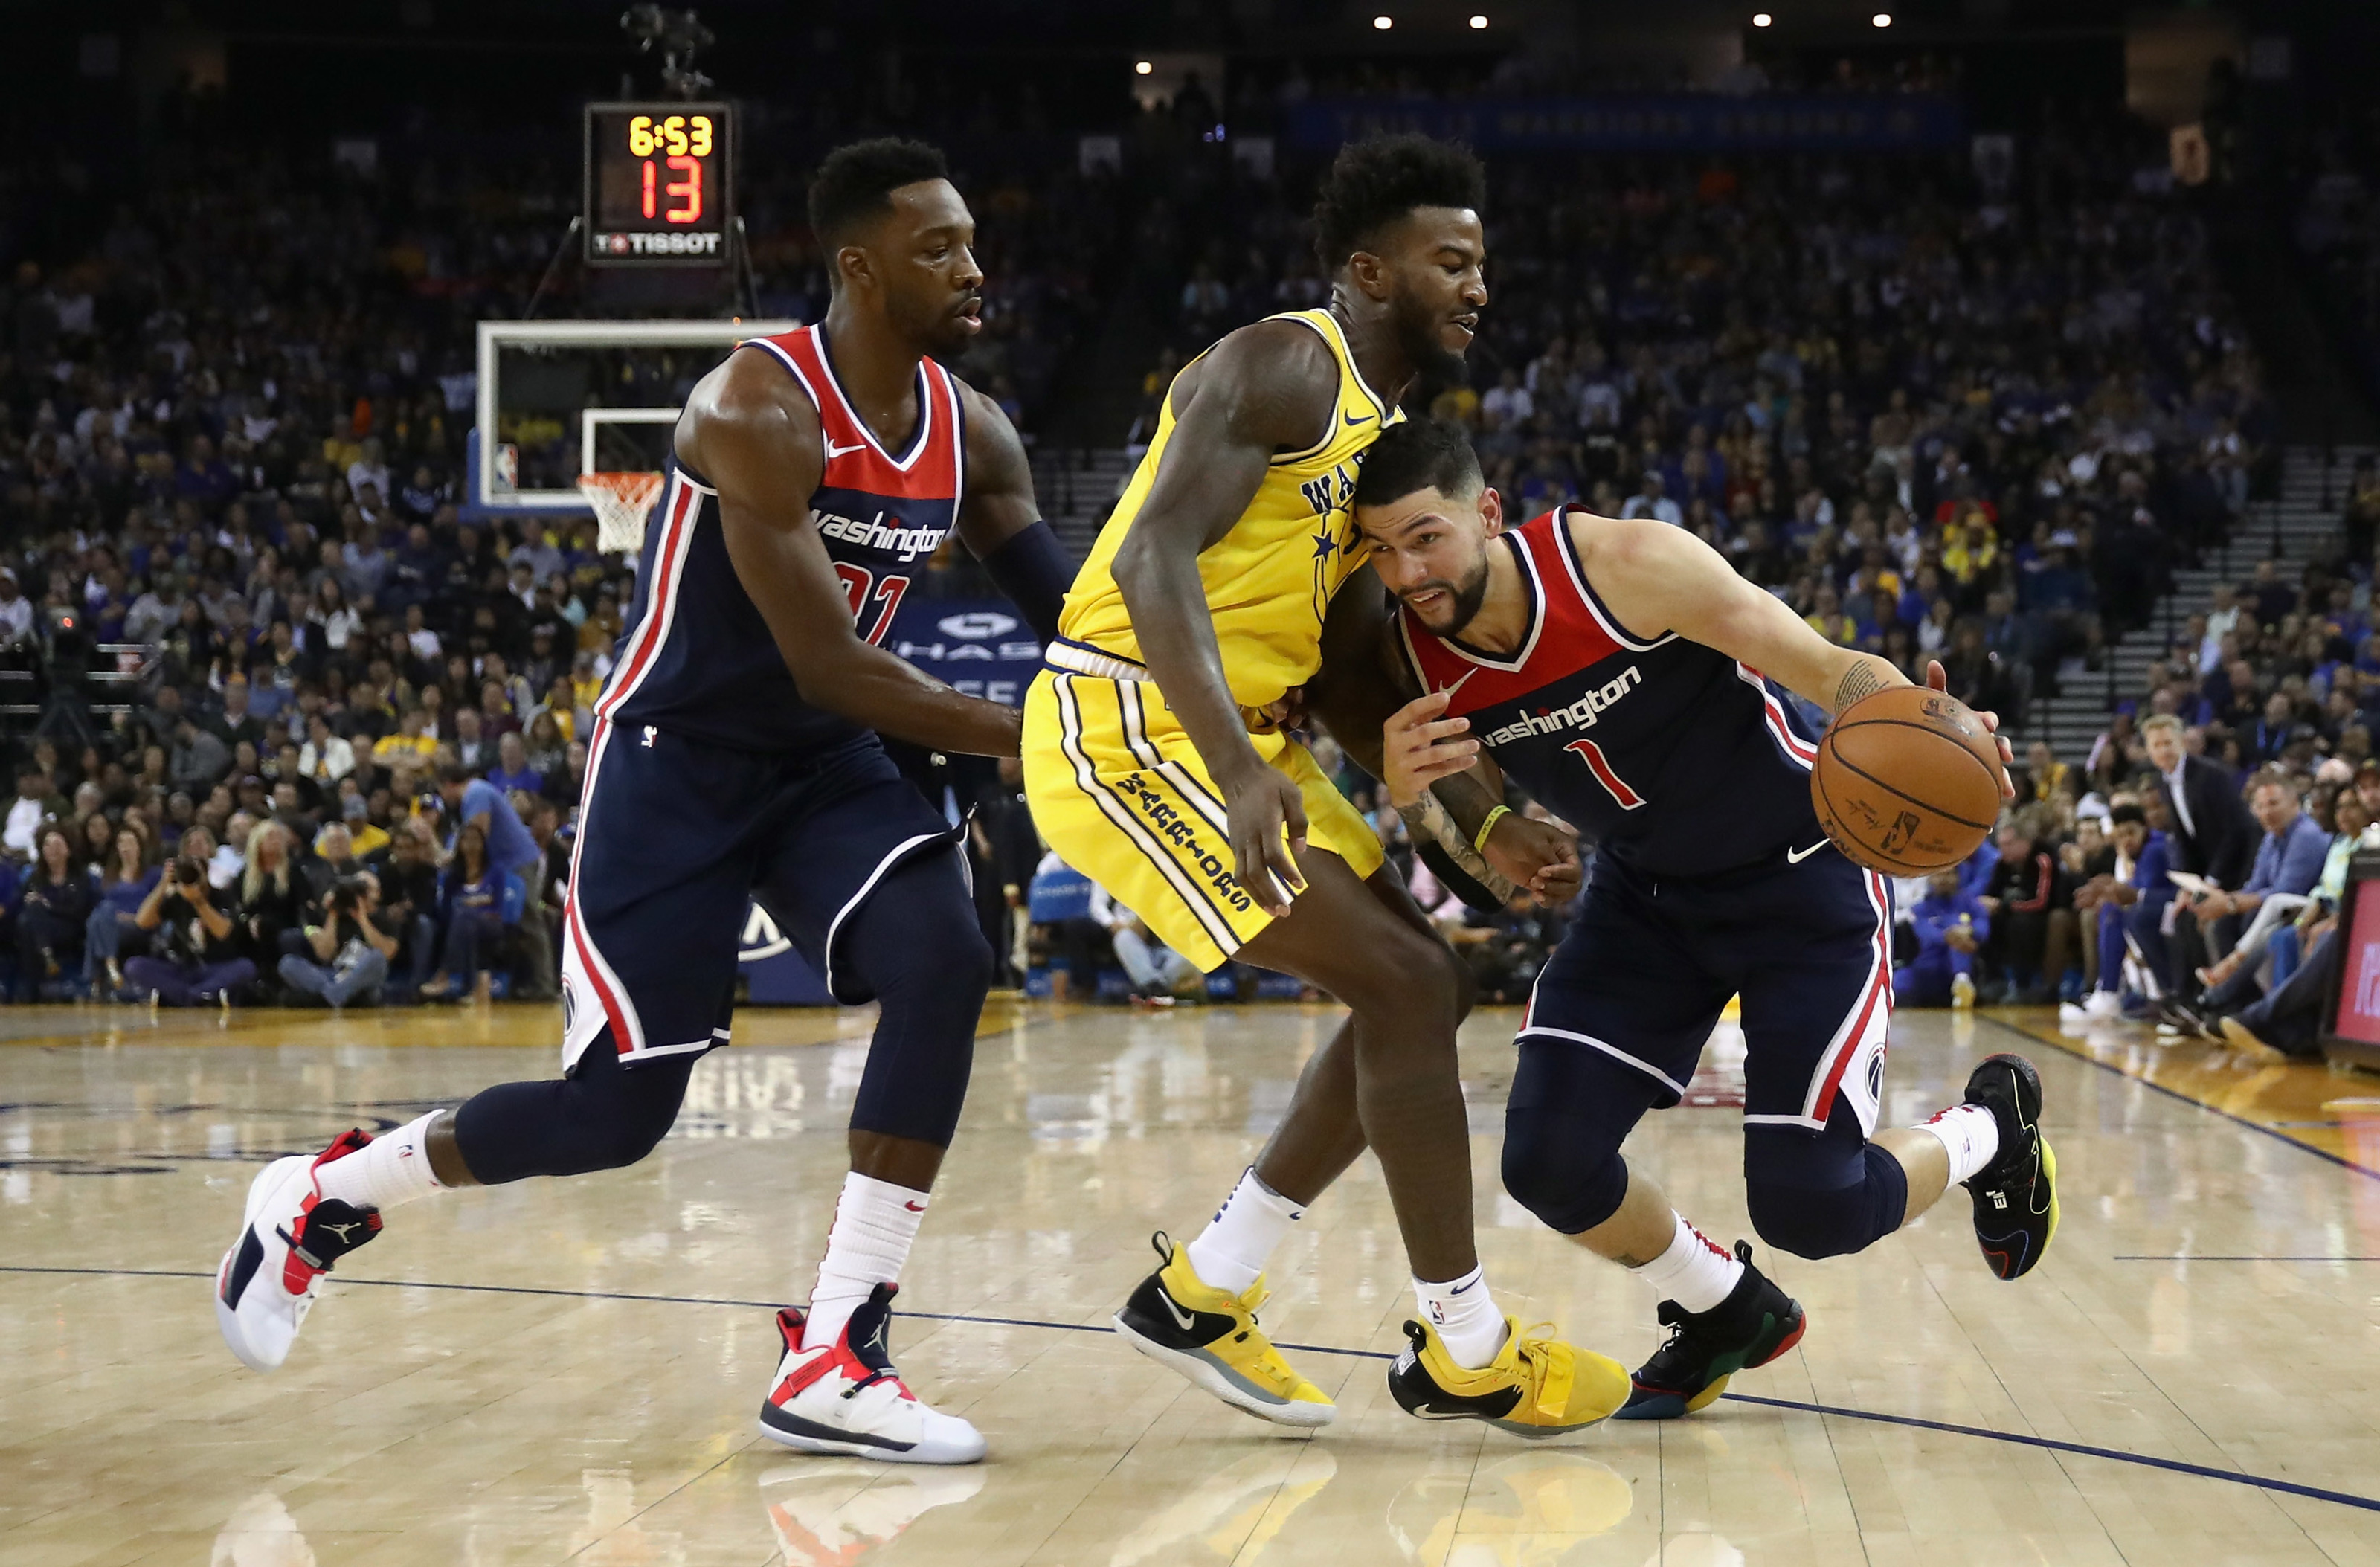 OAKLAND, CA - OCTOBER 24: Austin Rivers #1 of the Washington Wizards is guarded by Jordan Bell #2 of the Golden State Warriors while Jeff Green #32 of the Washington Wizards tries to set a pick at ORACLE Arena on October 24, 2018 in Oakland, California. NOTE TO USER: User expressly acknowledges and agrees that, by downloading and or using this photograph, User is consenting to the terms and conditions of the Getty Images License Agreement. (Photo by Ezra Shaw/Getty Images)